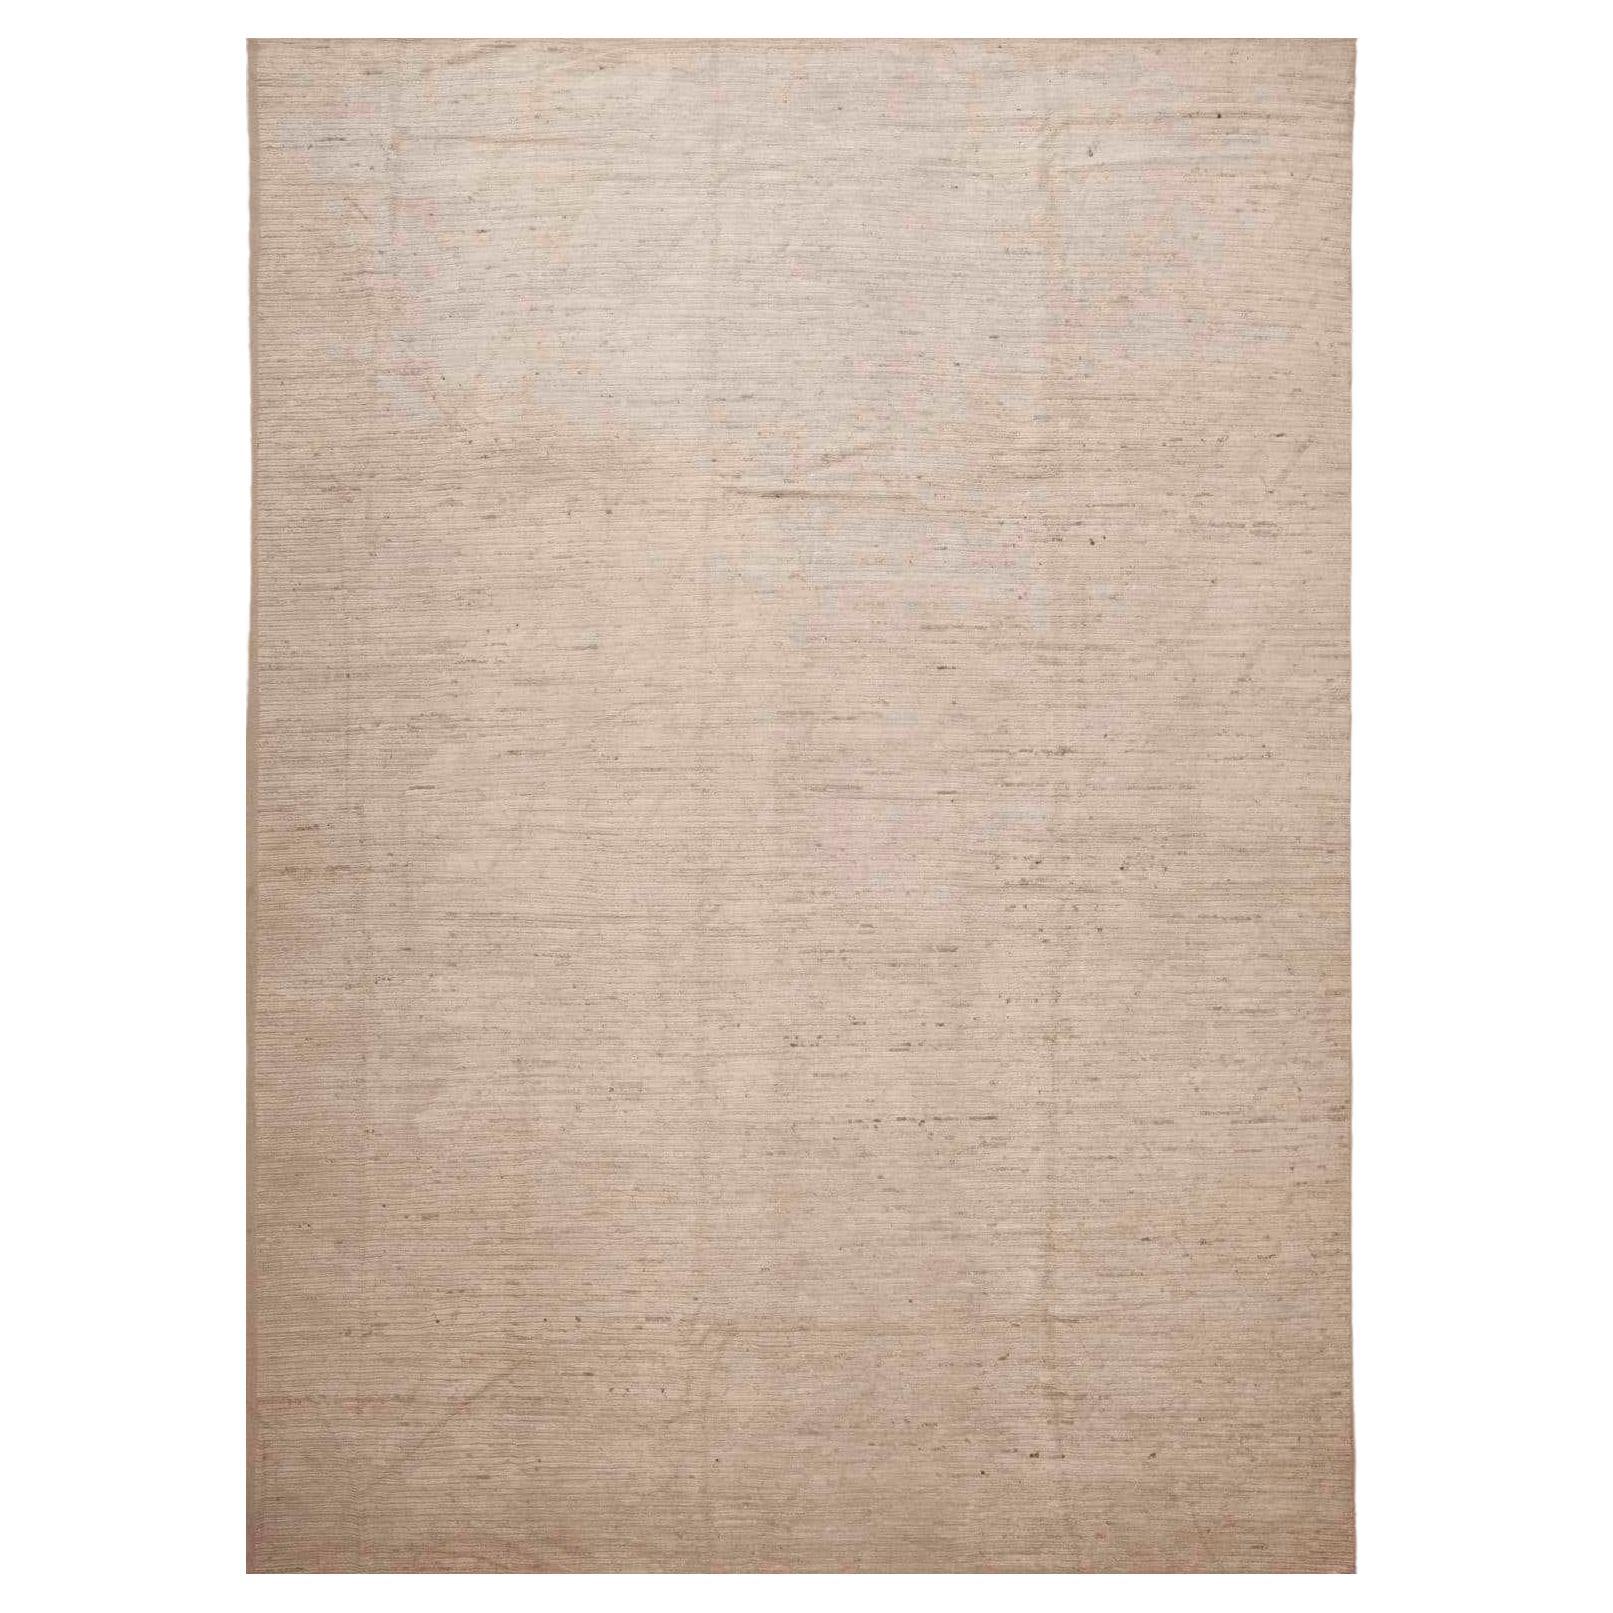 The Collective Ivory Cream Minimalist Abstract Modern Area Rug 10' x 12'10" (collection ivoire crème abstraite moderne)